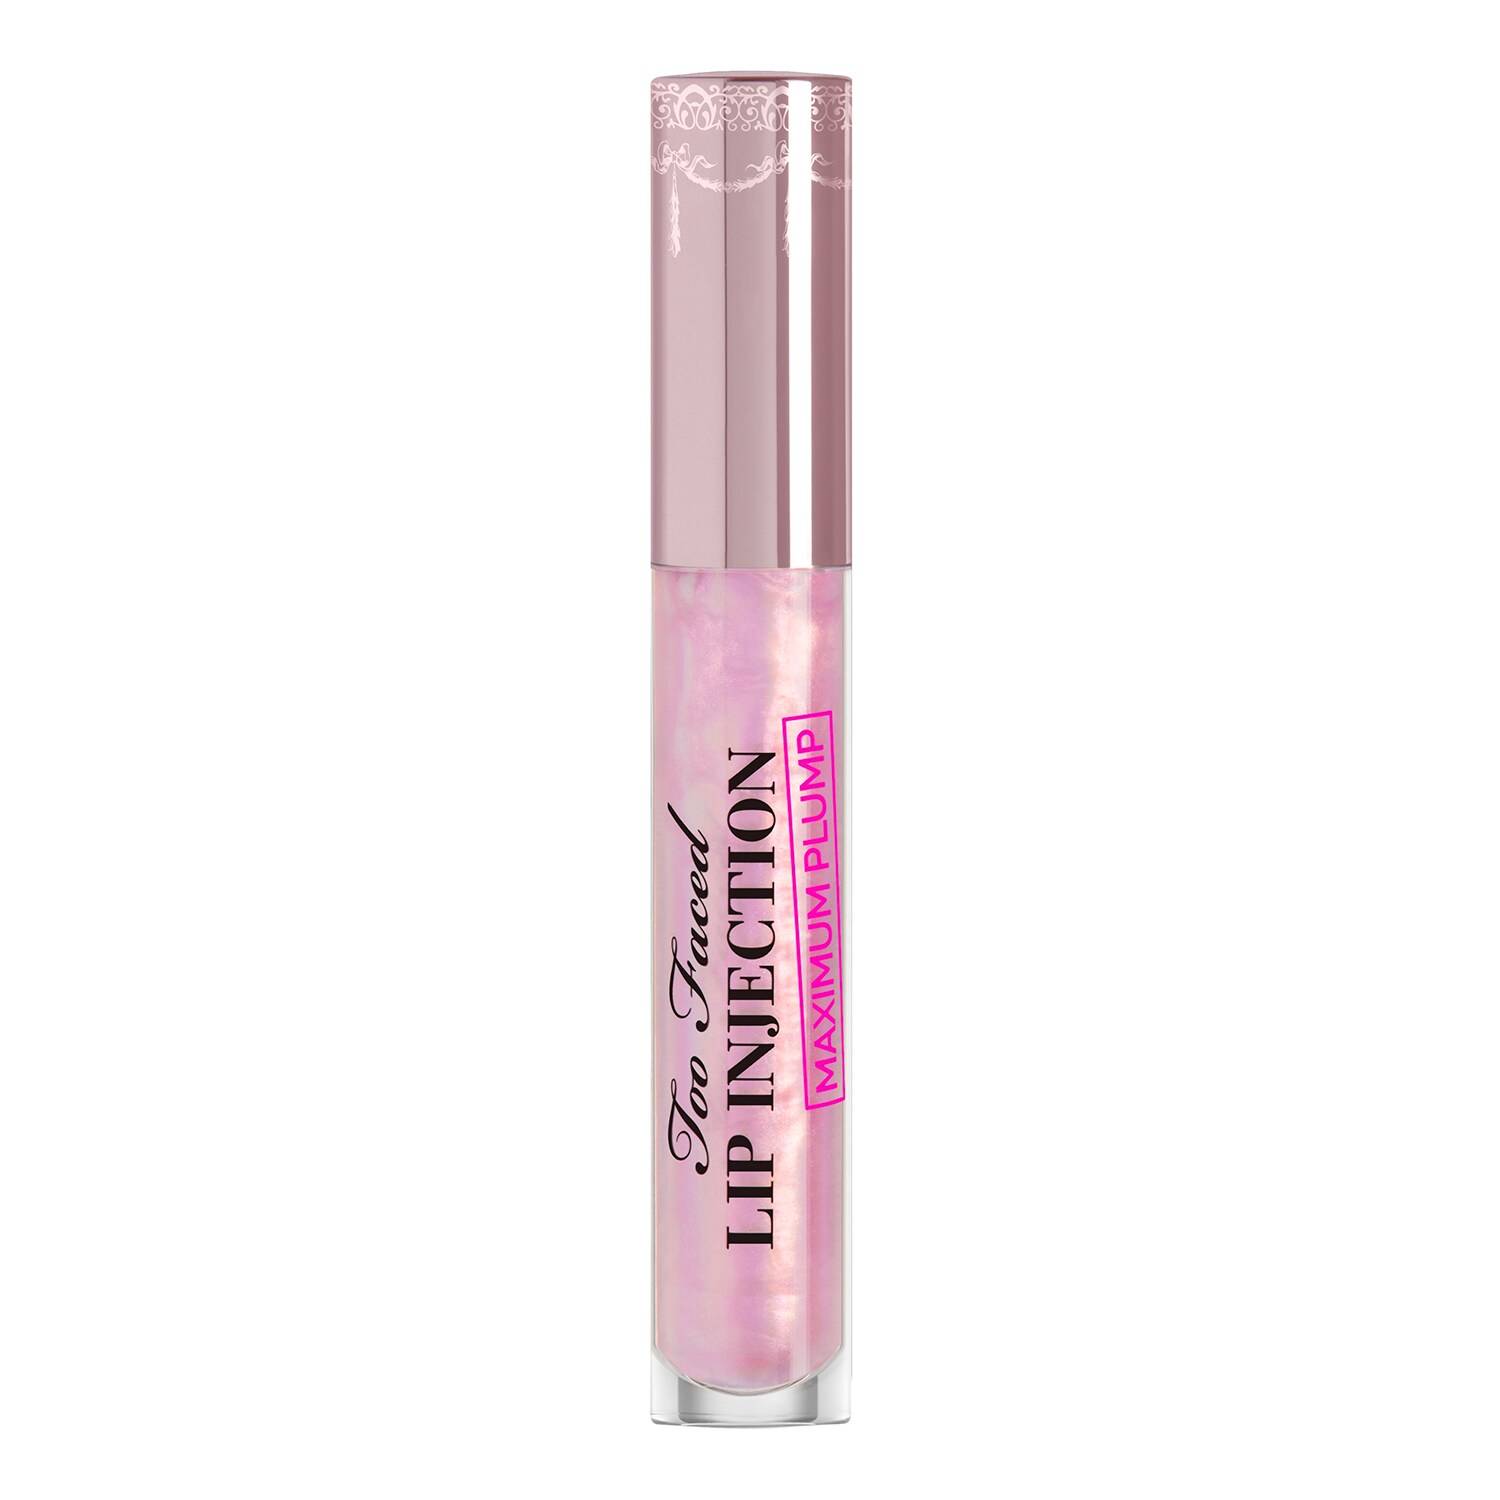 too faced lip injection maximum plump 4ml cotton candy kisses